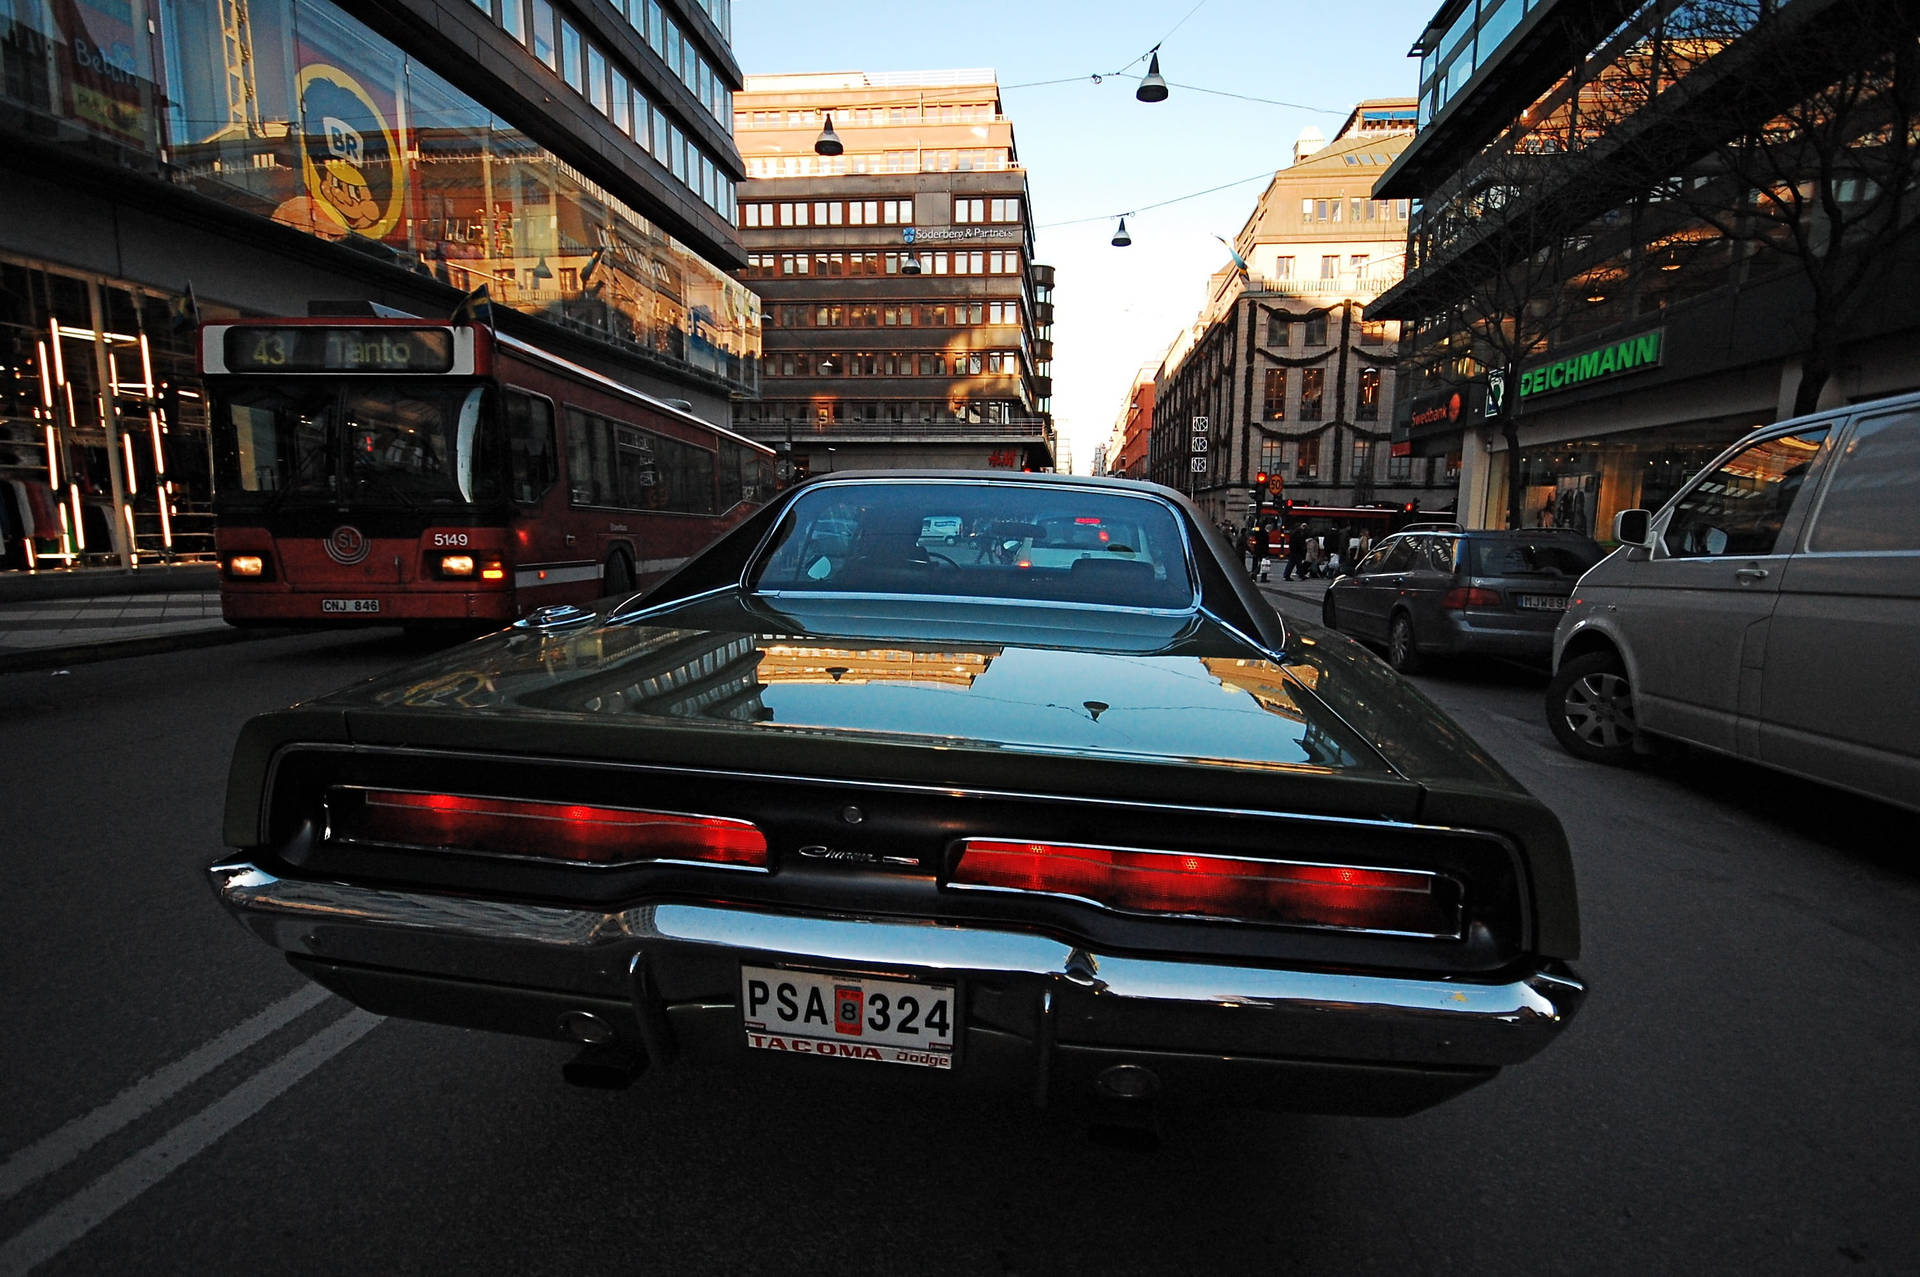 1969 Dodge Charger At City